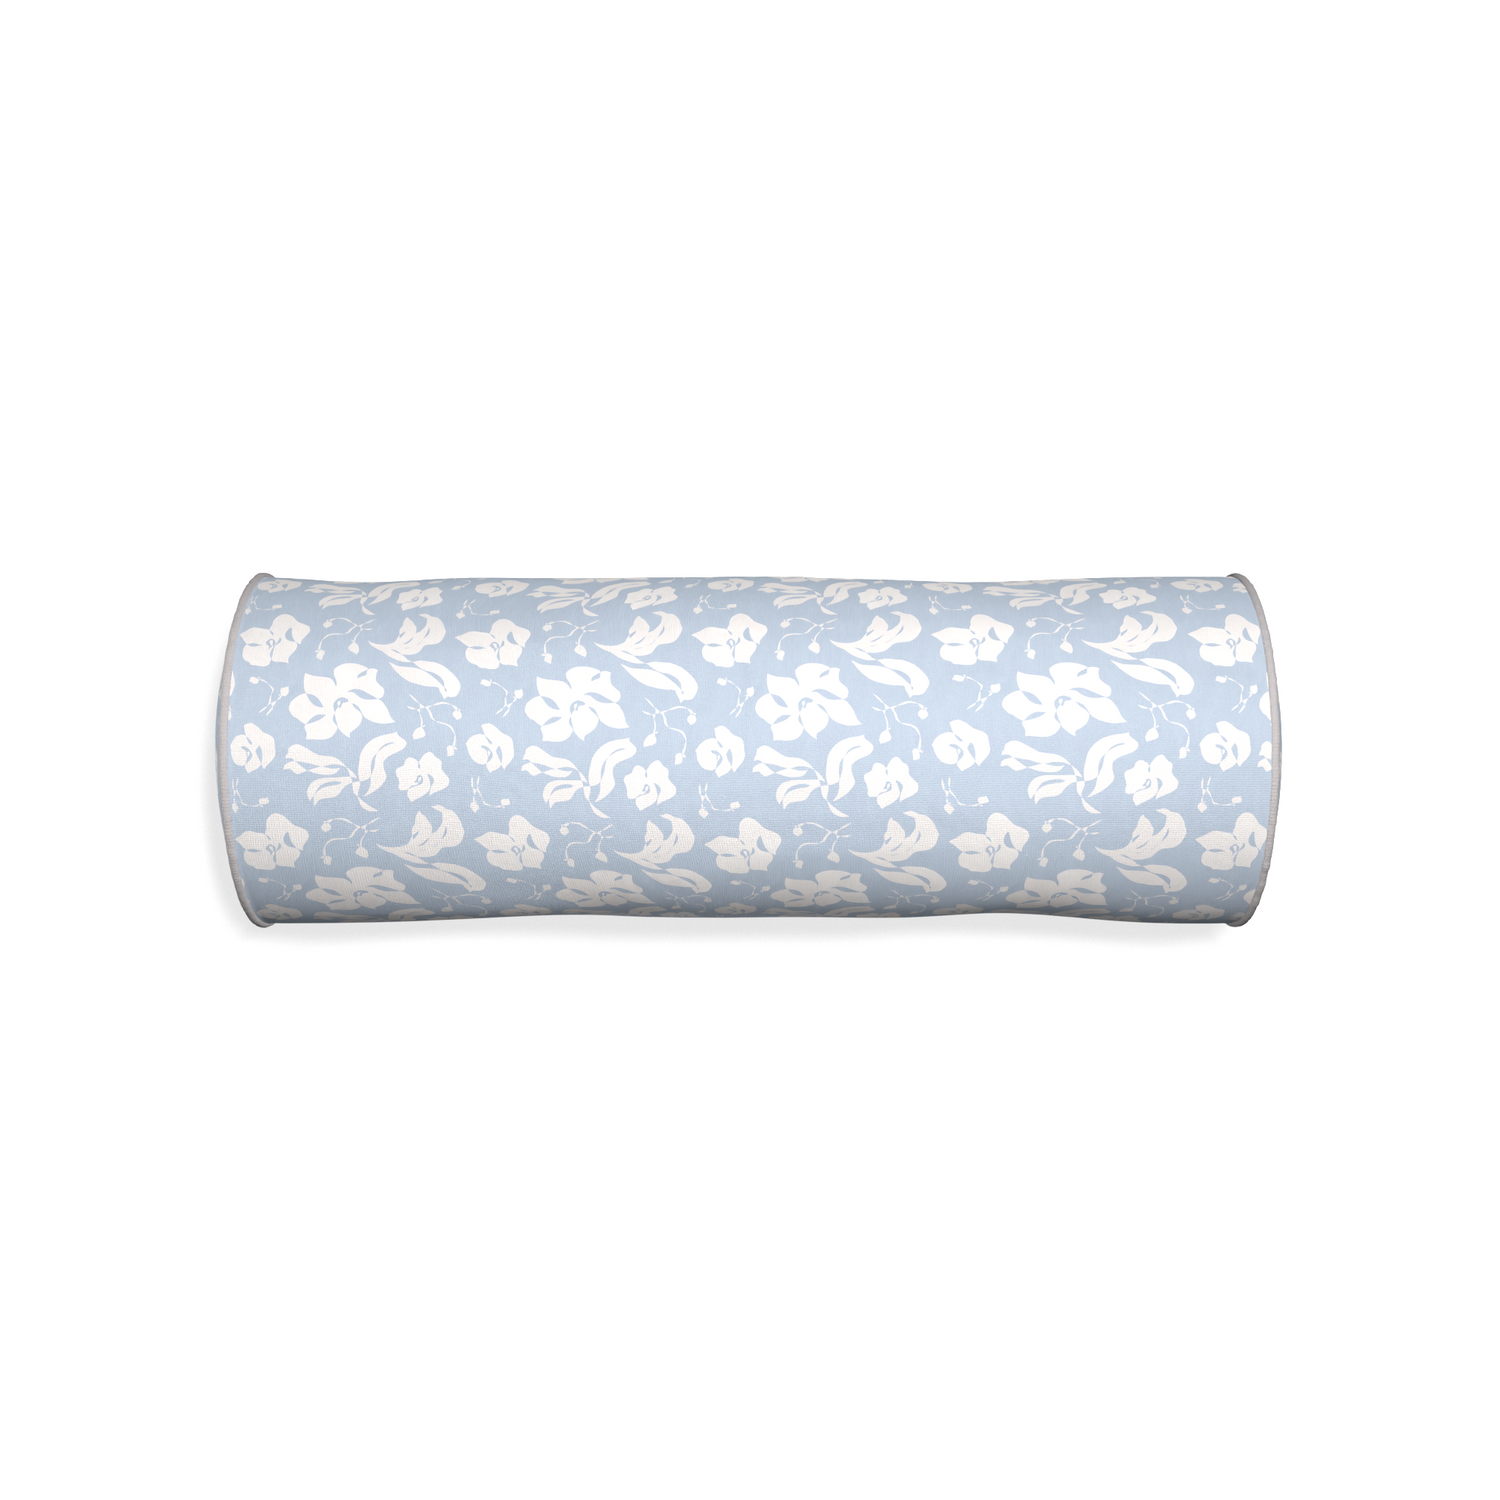 Bolster georgia custom cornflower blue floralpillow with pebble piping on white background